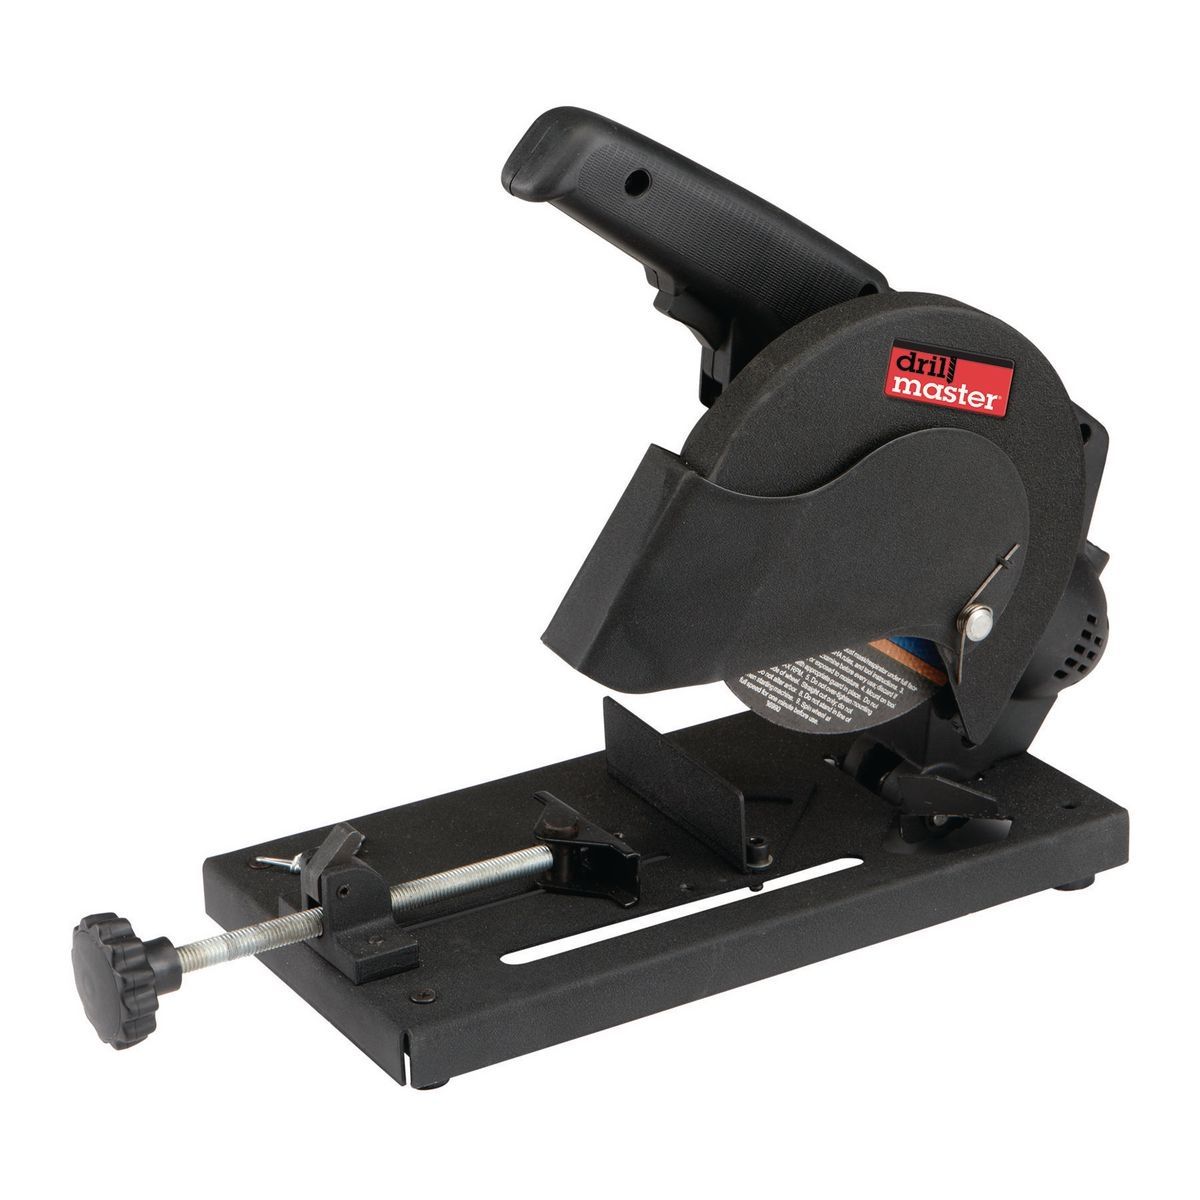 DRILL MASTER 6 in. 5.5 Amp Cut-Off Saw